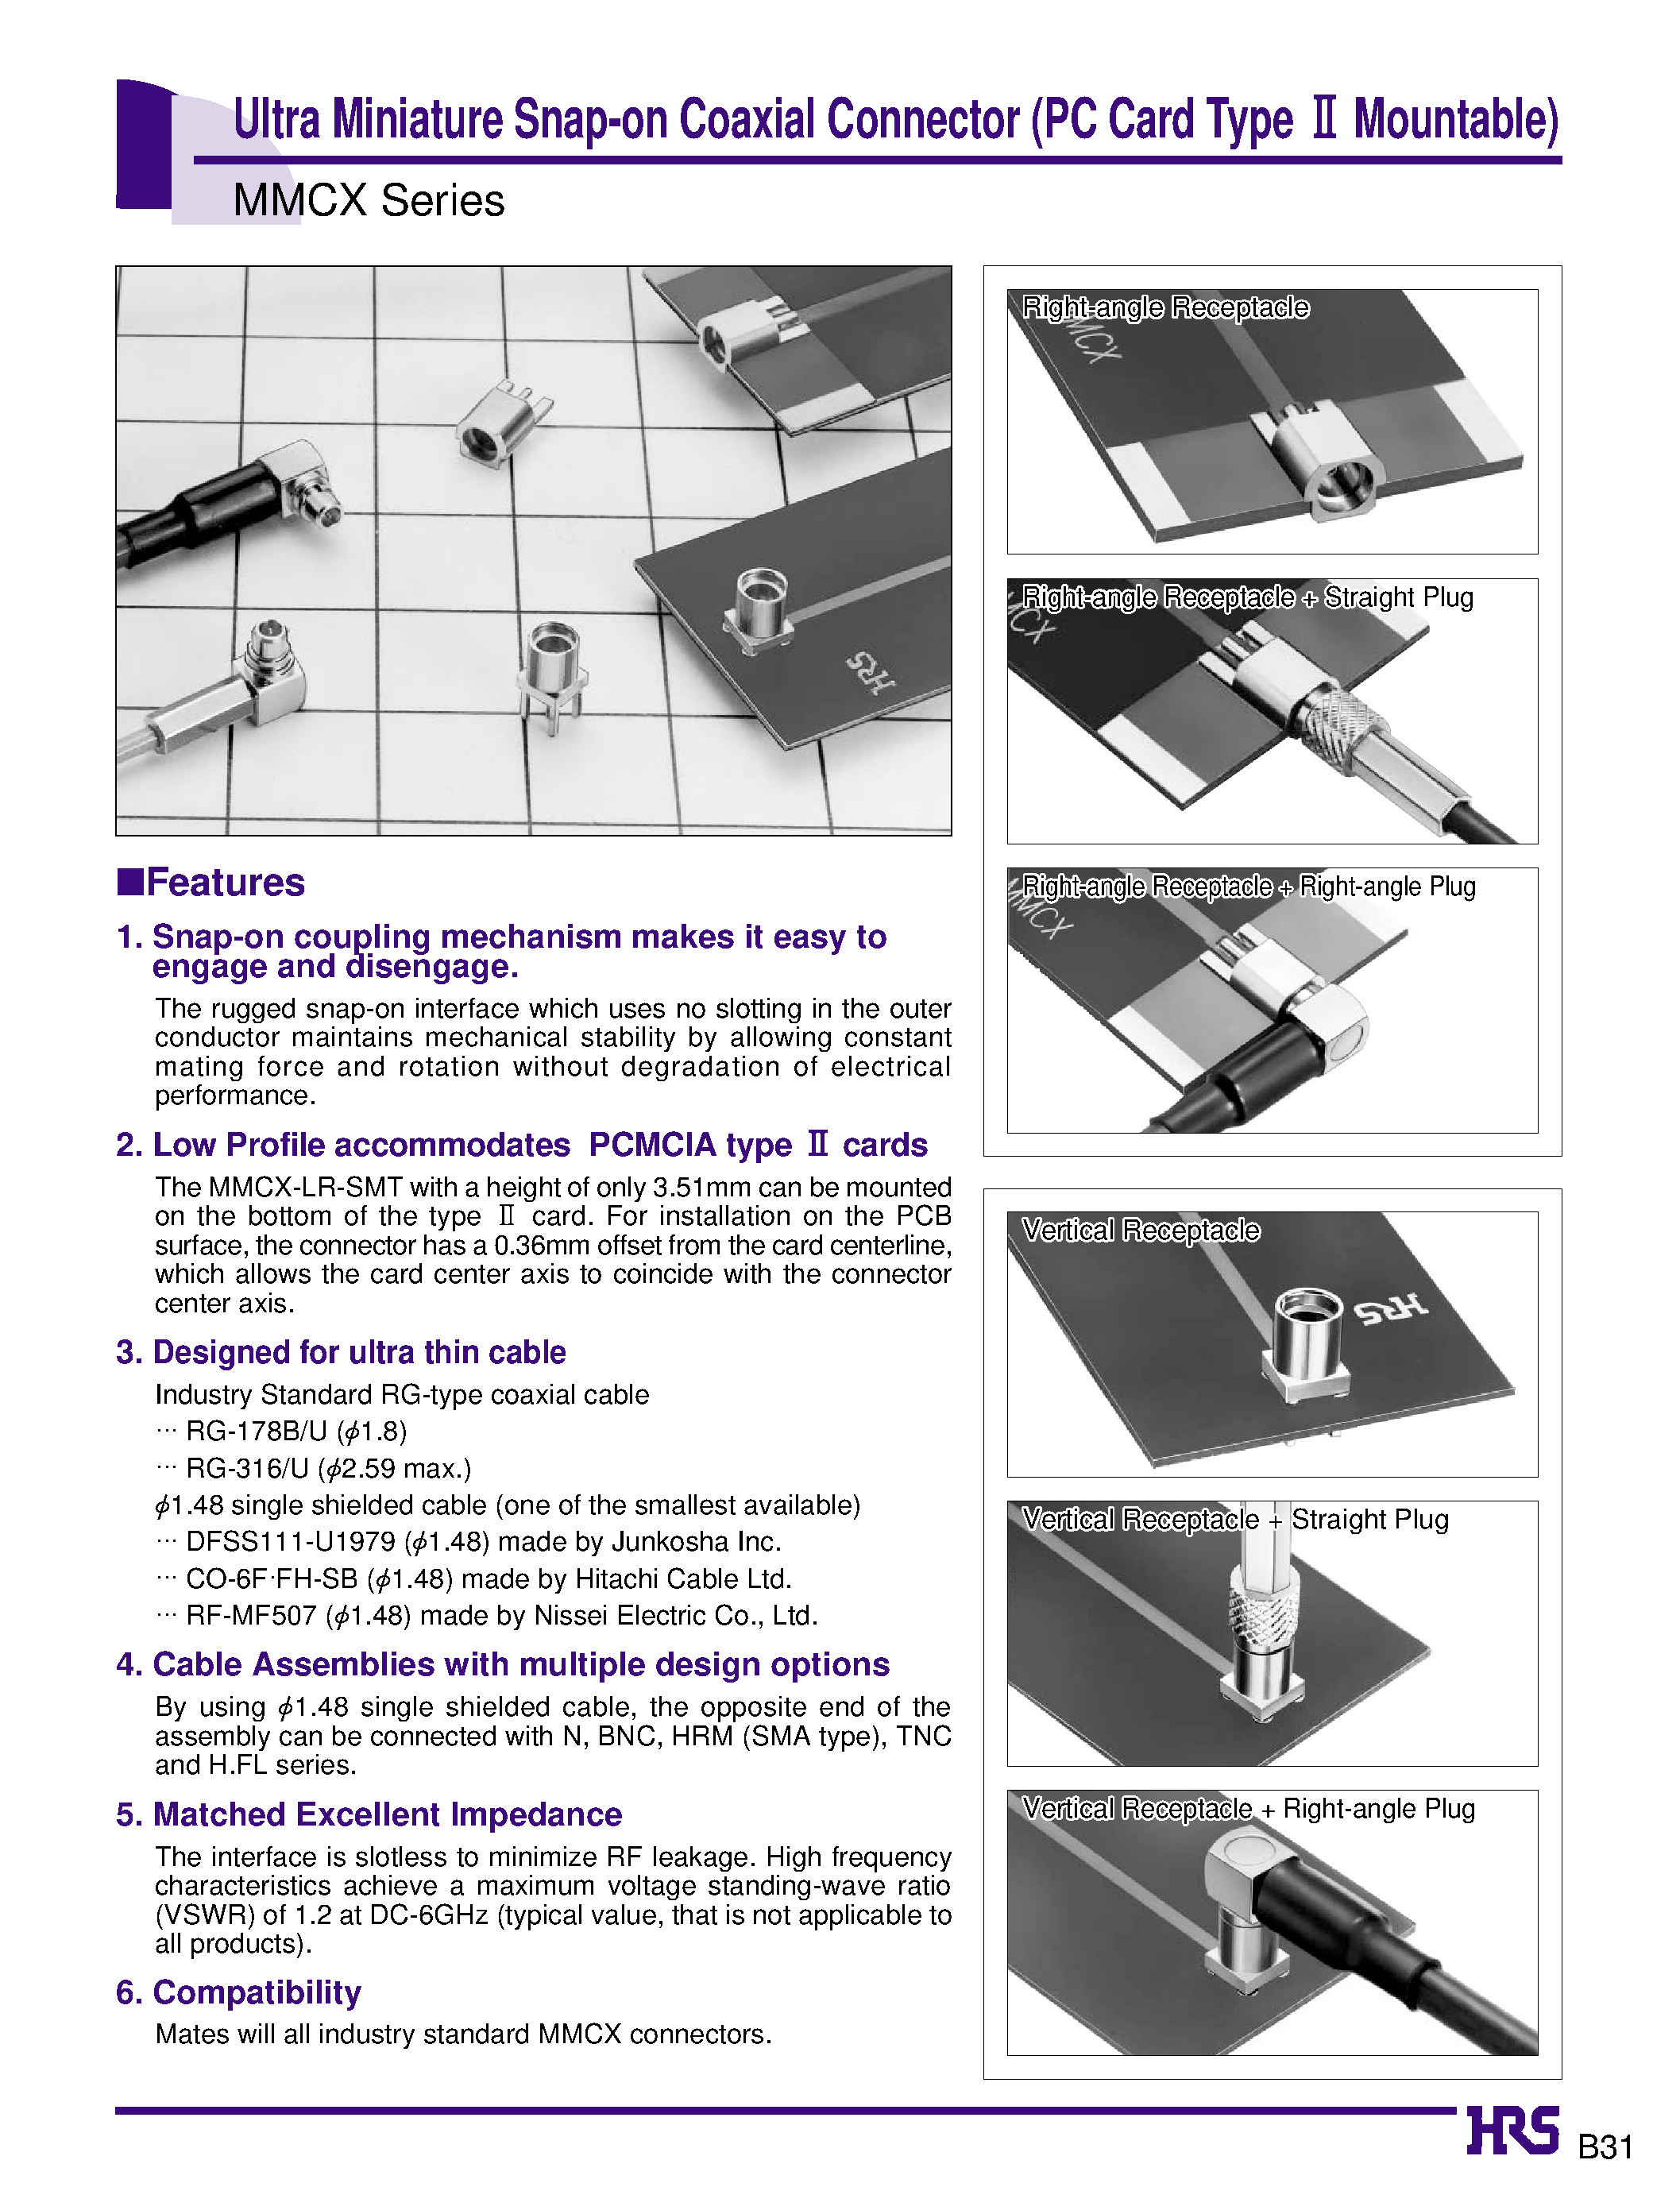 Datasheet MMCX-J-FHSB - Ultra Miniature Snap-on Coaxial Connector (PC Card Type 2 Mountable) page 1